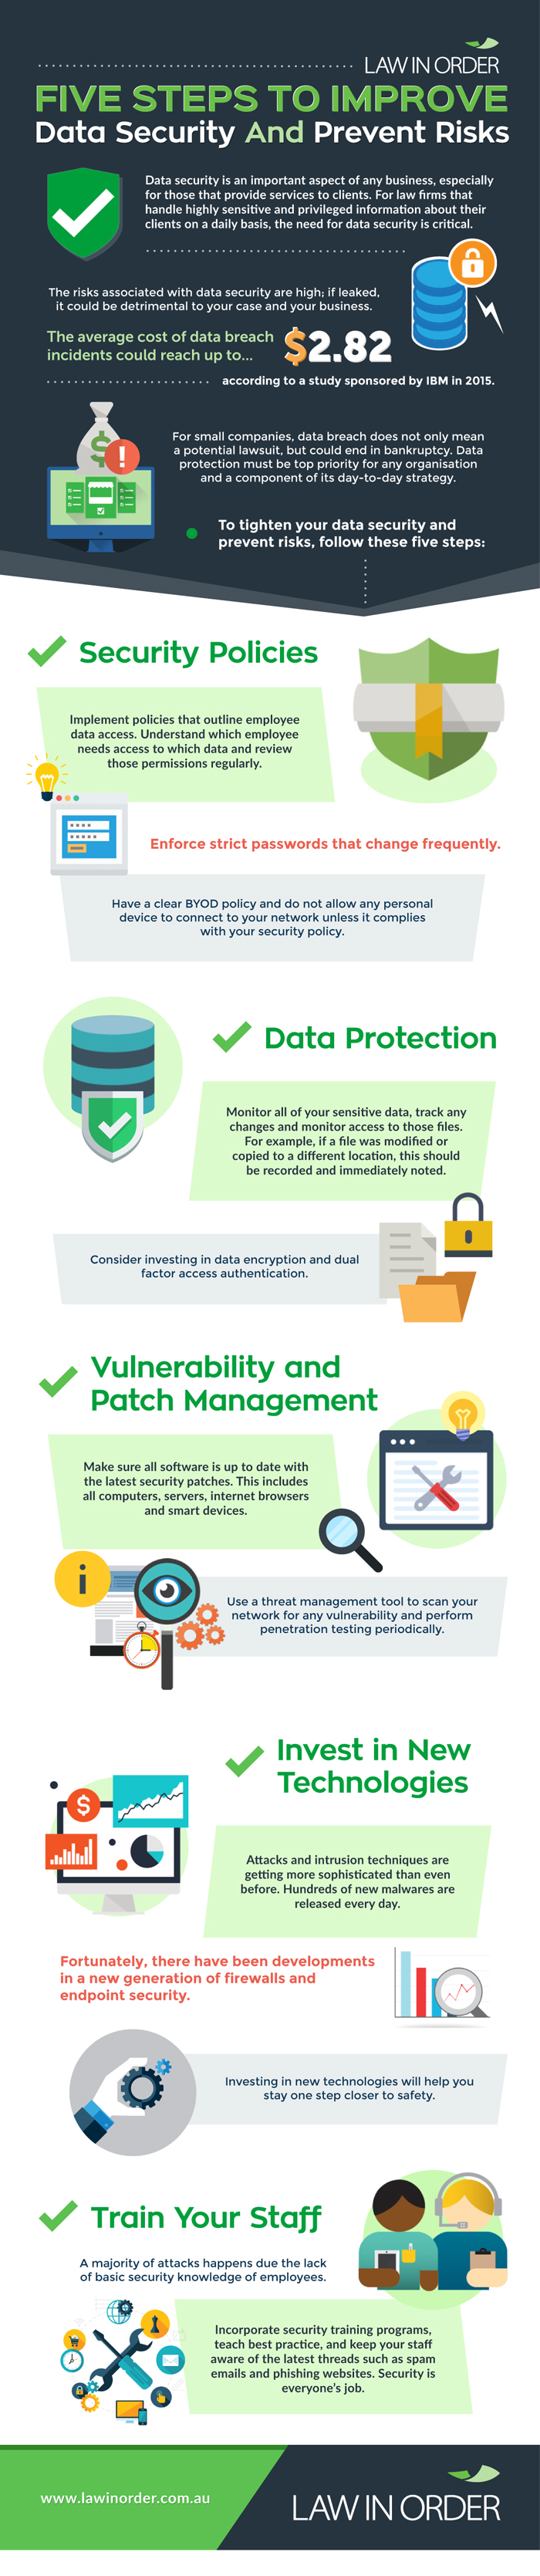 Five Steps To Improve Data Security And Prevent Risks.jpg